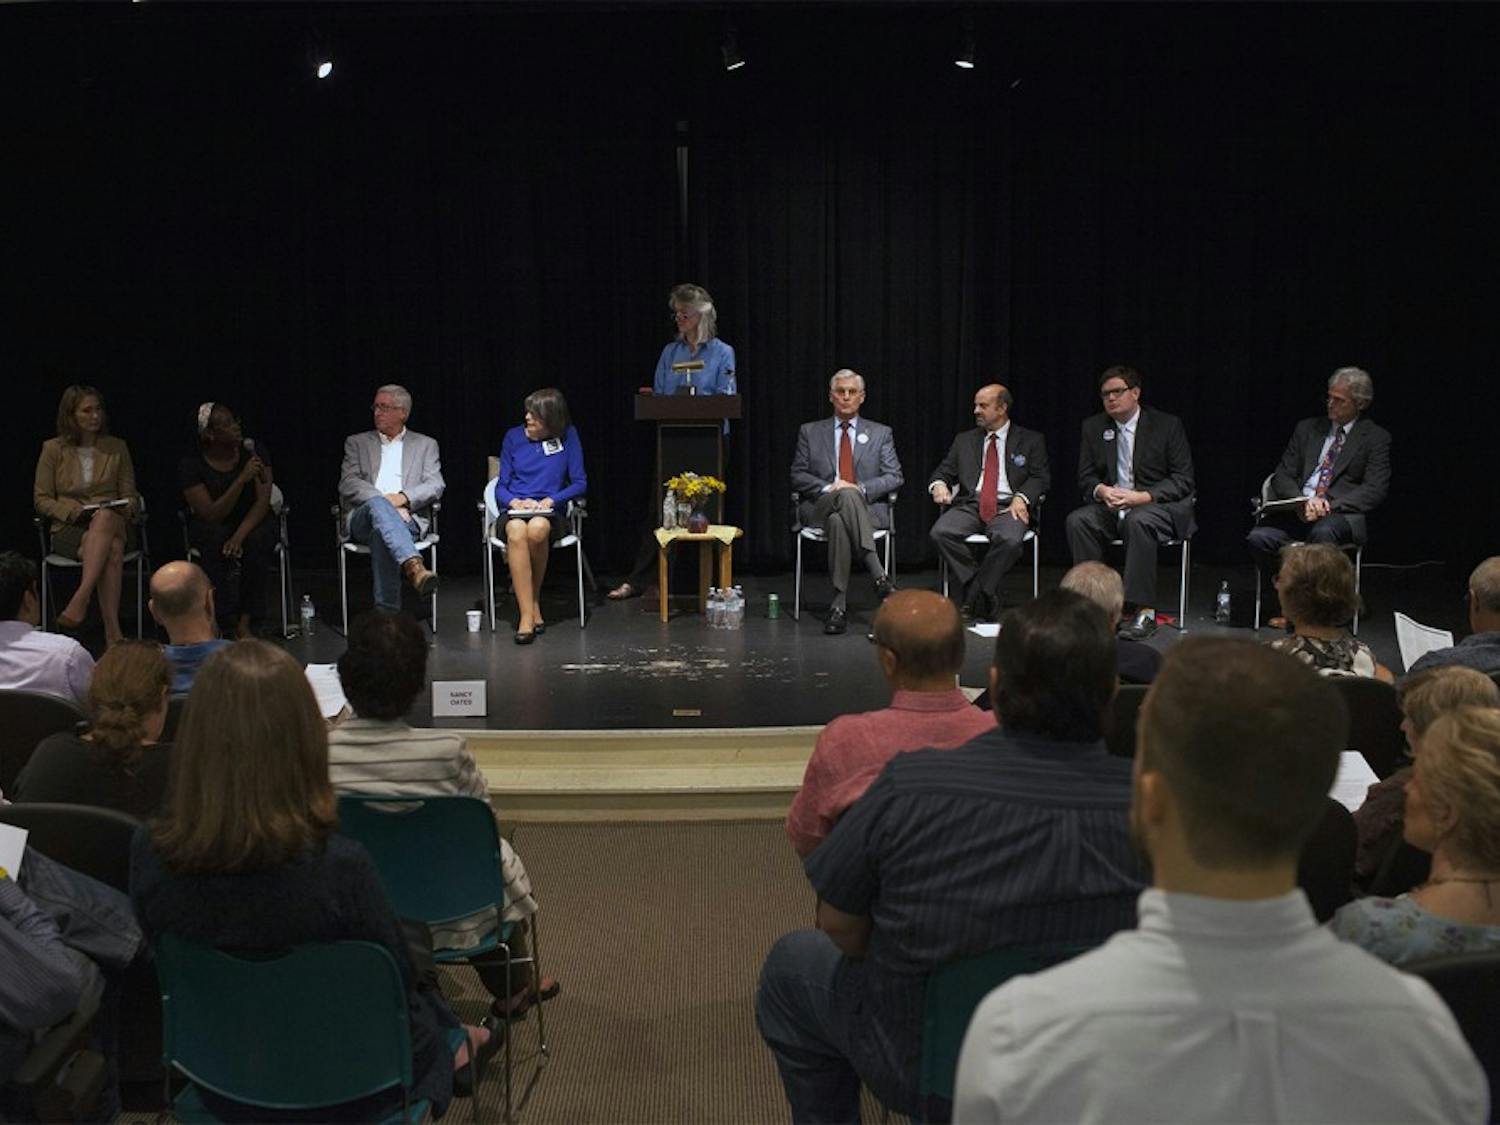 Incumbents and candidates for Chapel Hill town council answer questions and share their views at the CHALT Forum at the Seymour Senior Center on Tuesday, 15, 2015.